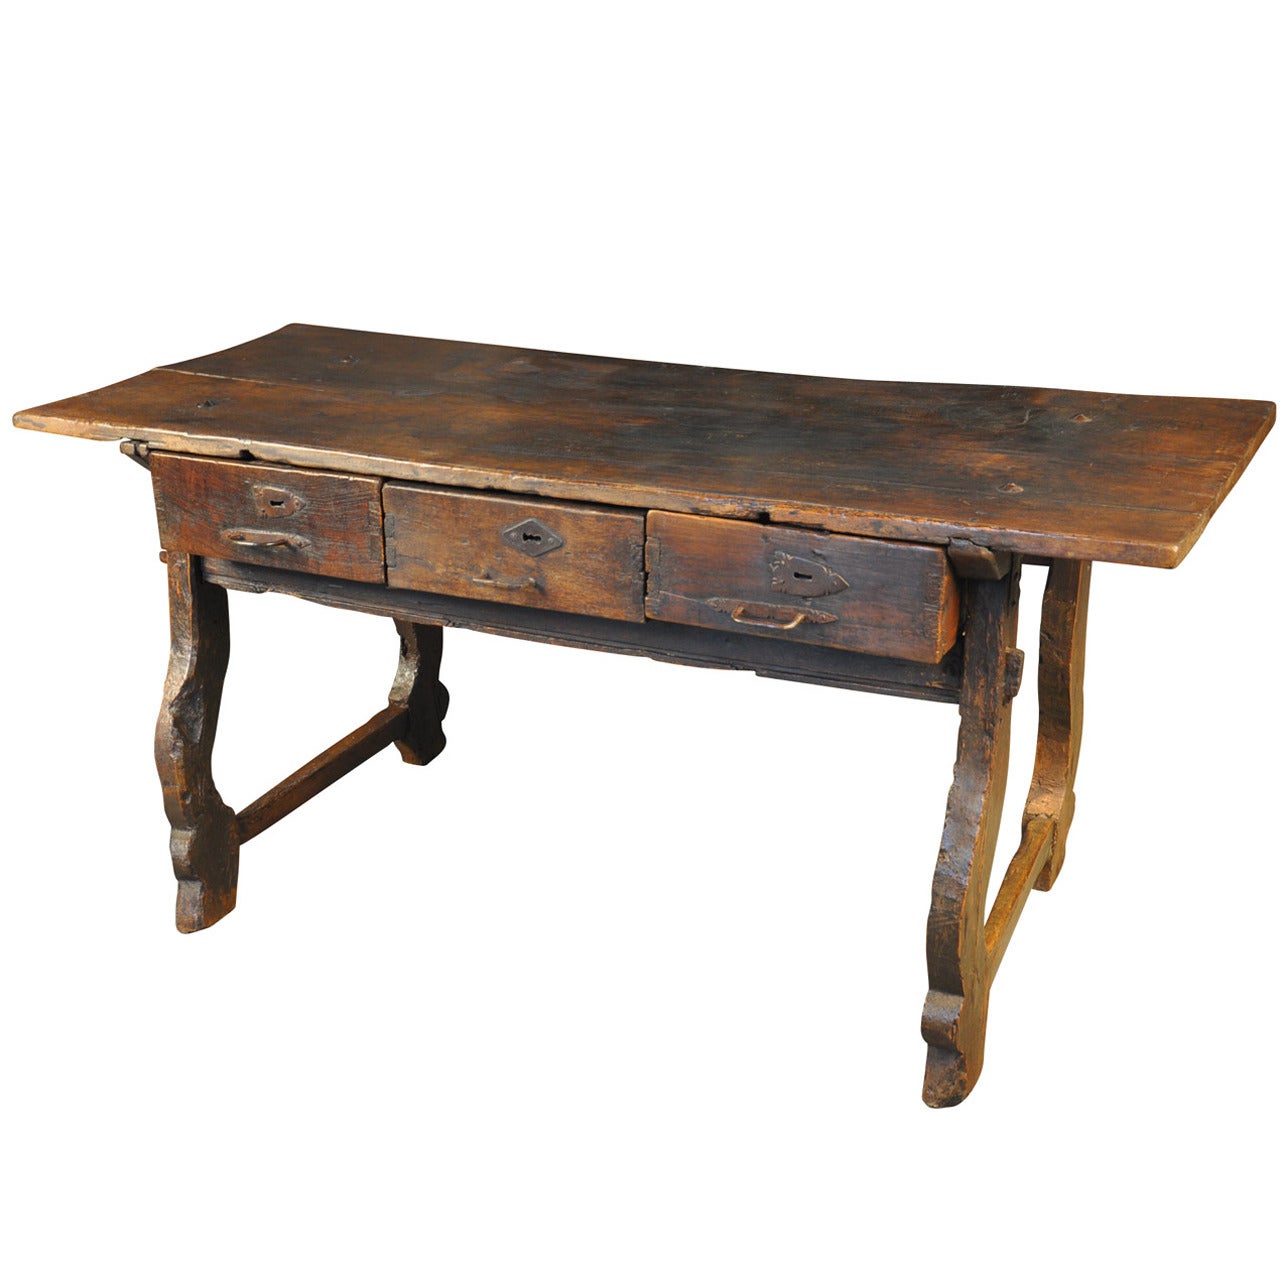 Spanish Table From The 17th Century